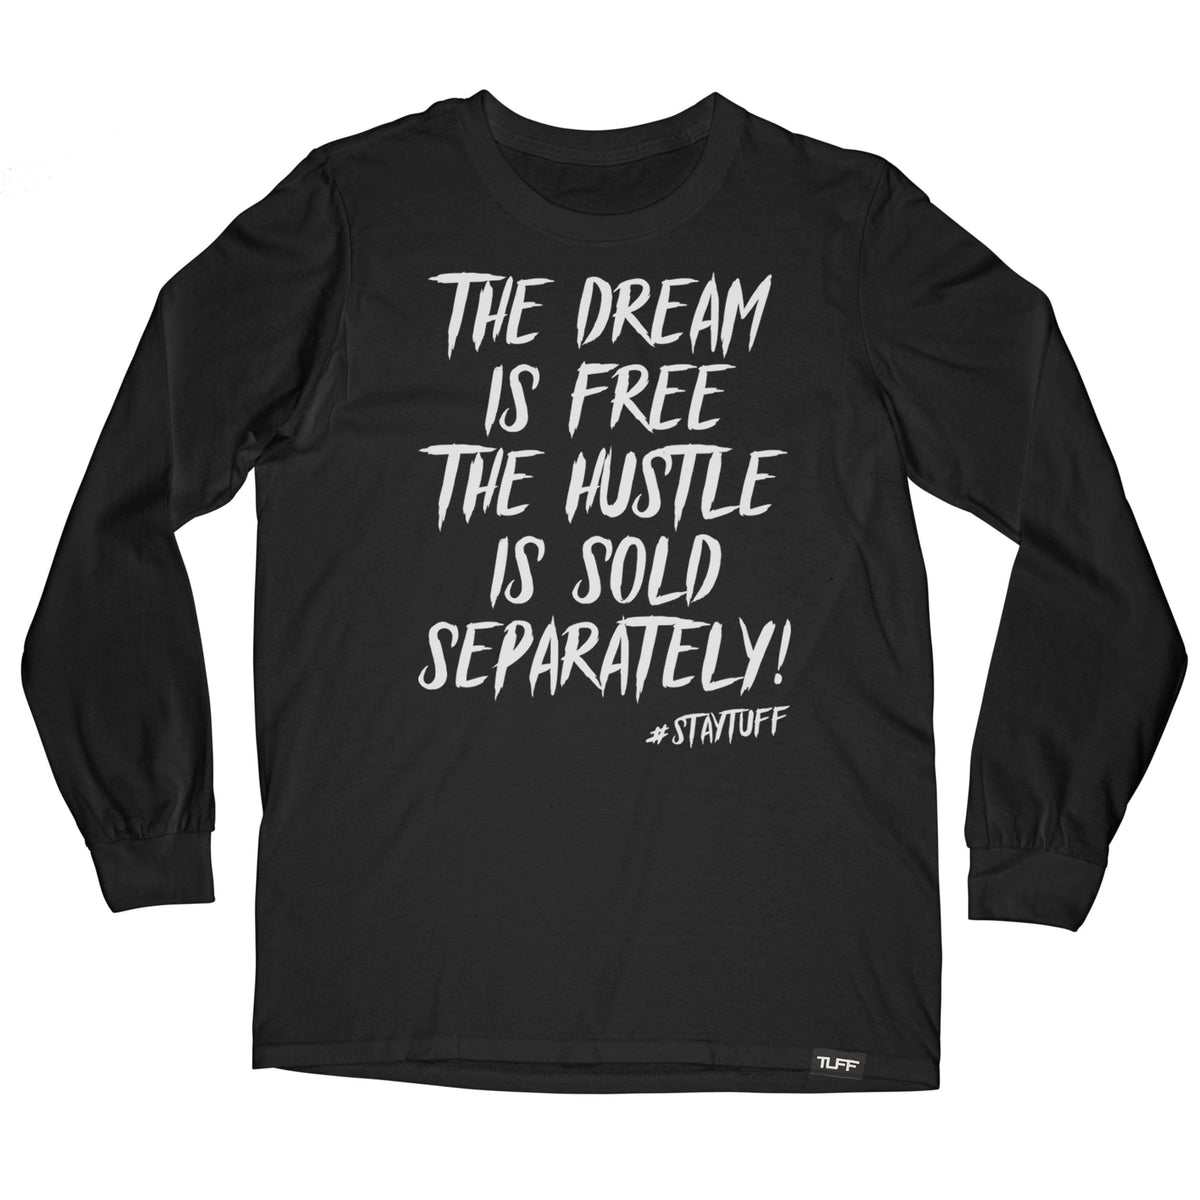 The Dream Is Free The Hustle Is Sold Separately Long Sleeve Tee S / Black TuffWraps.com